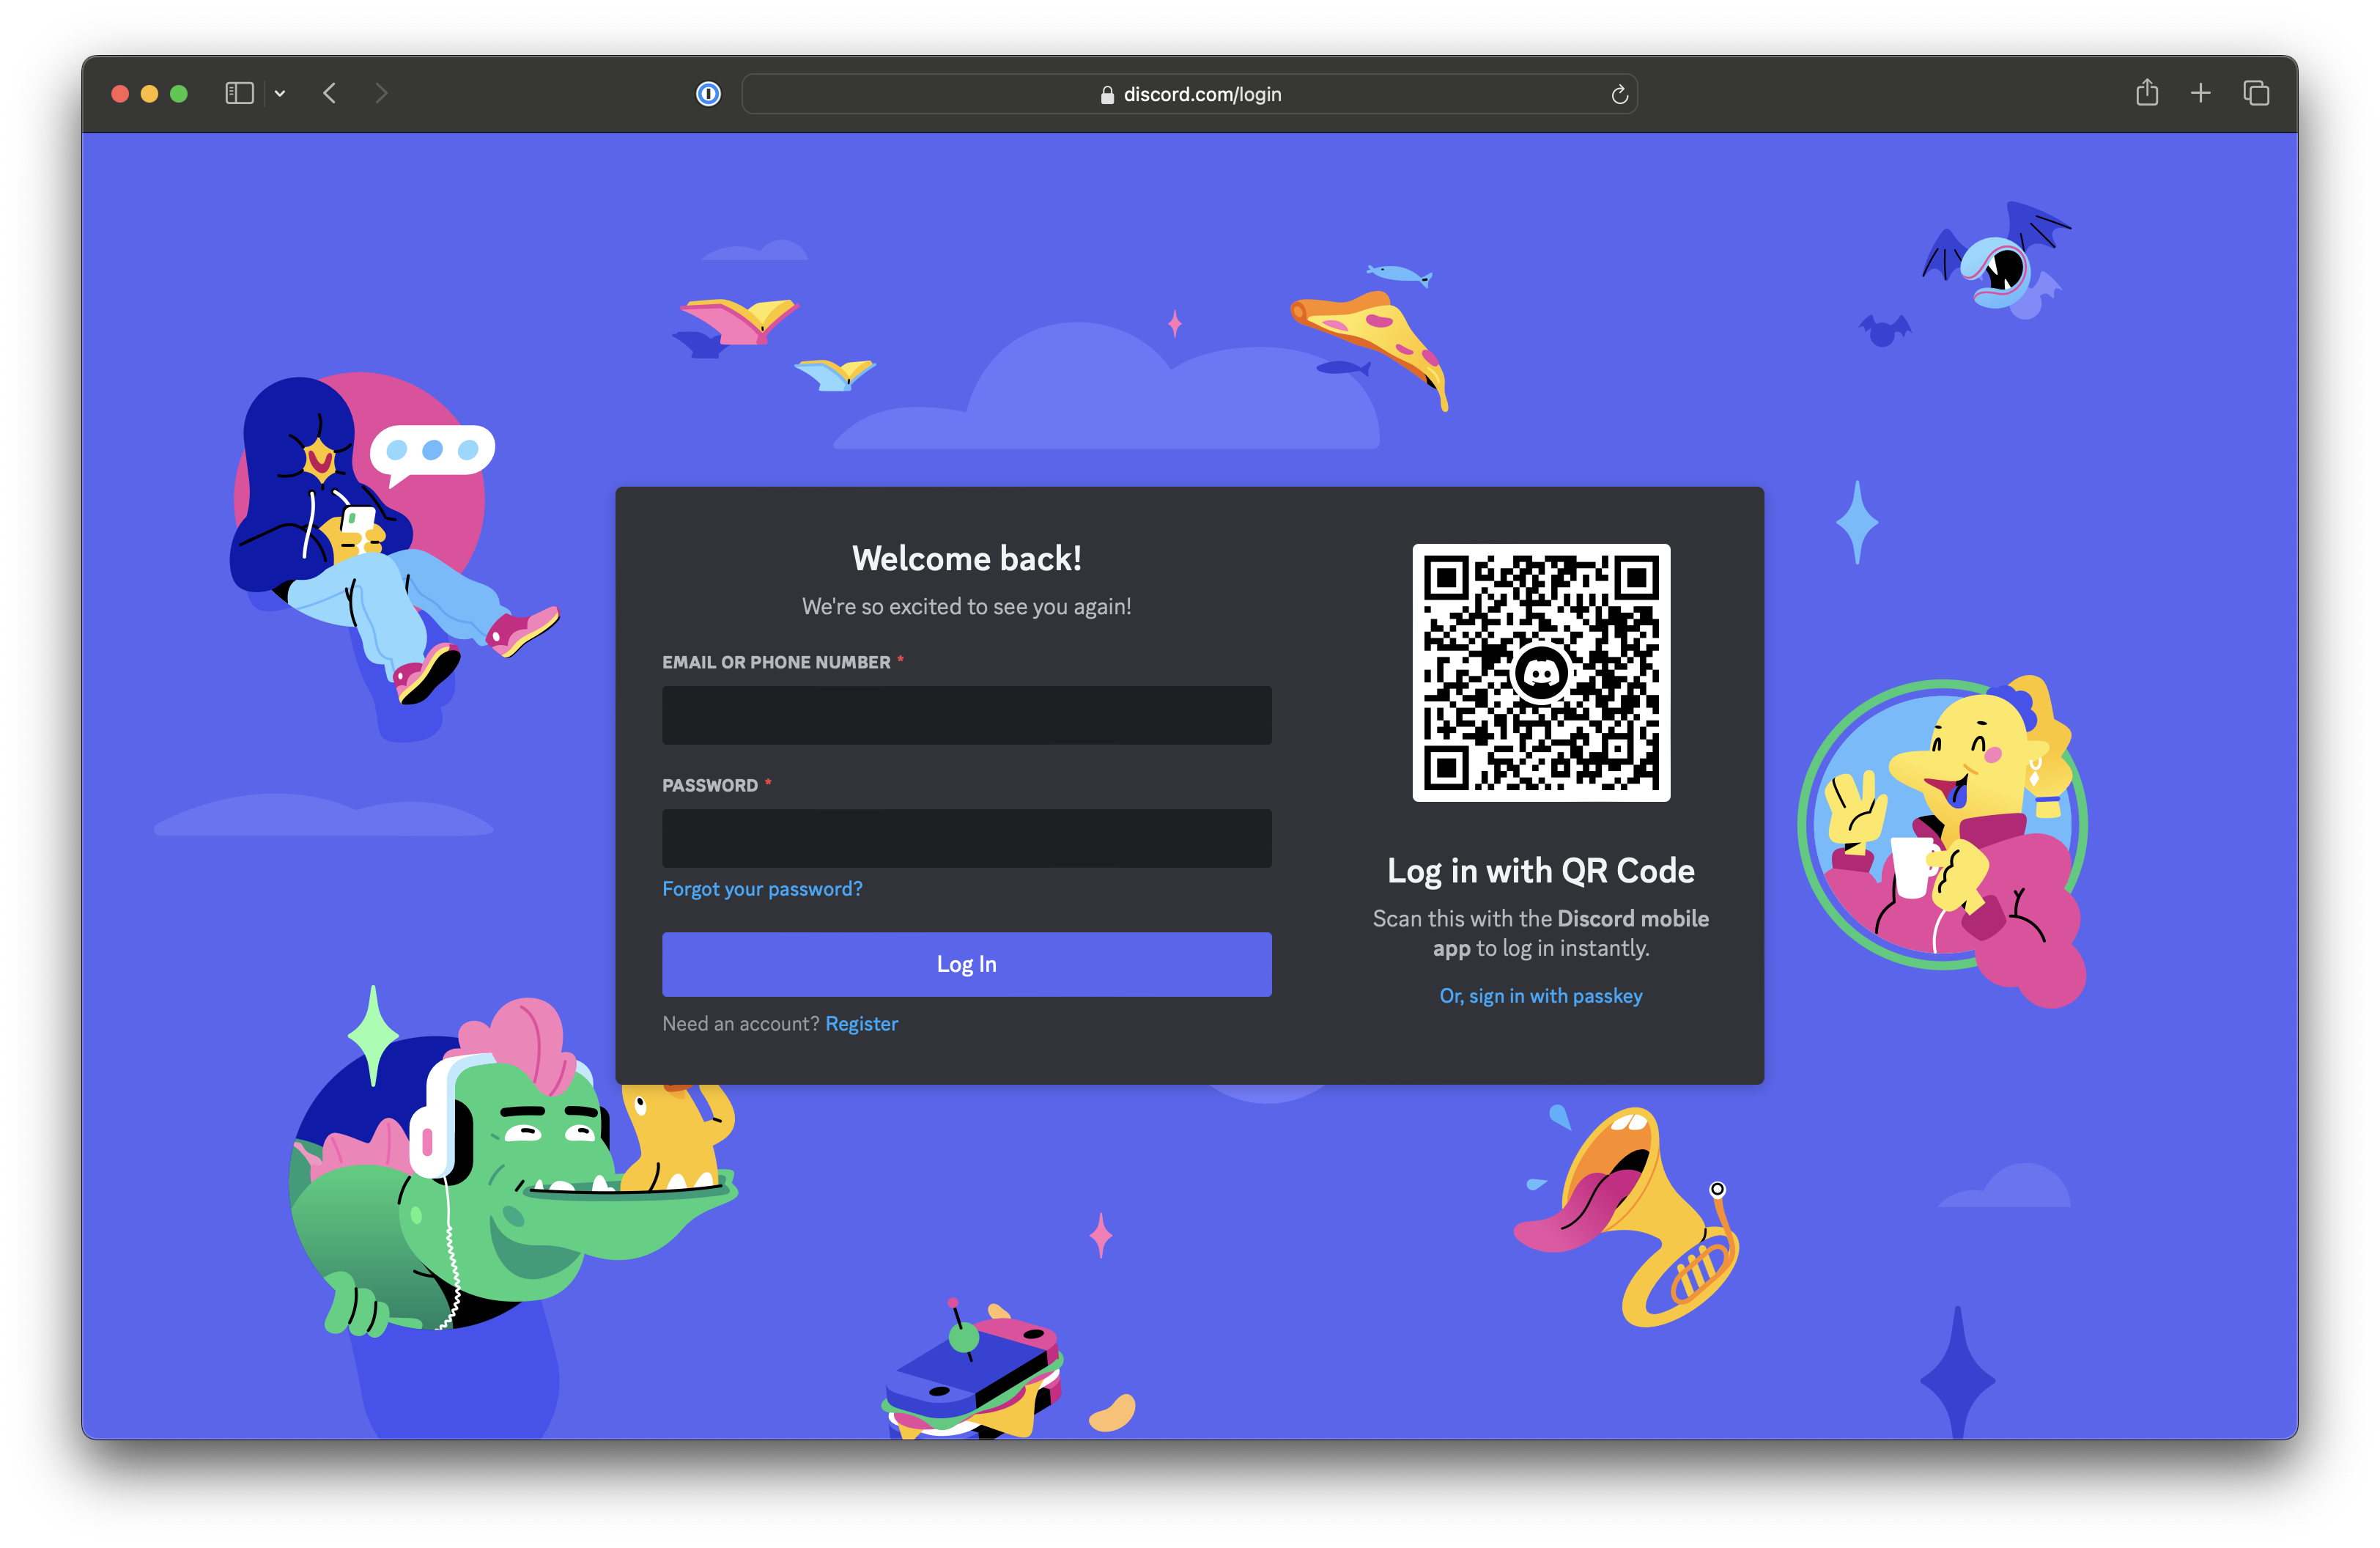 discord login page with qr code